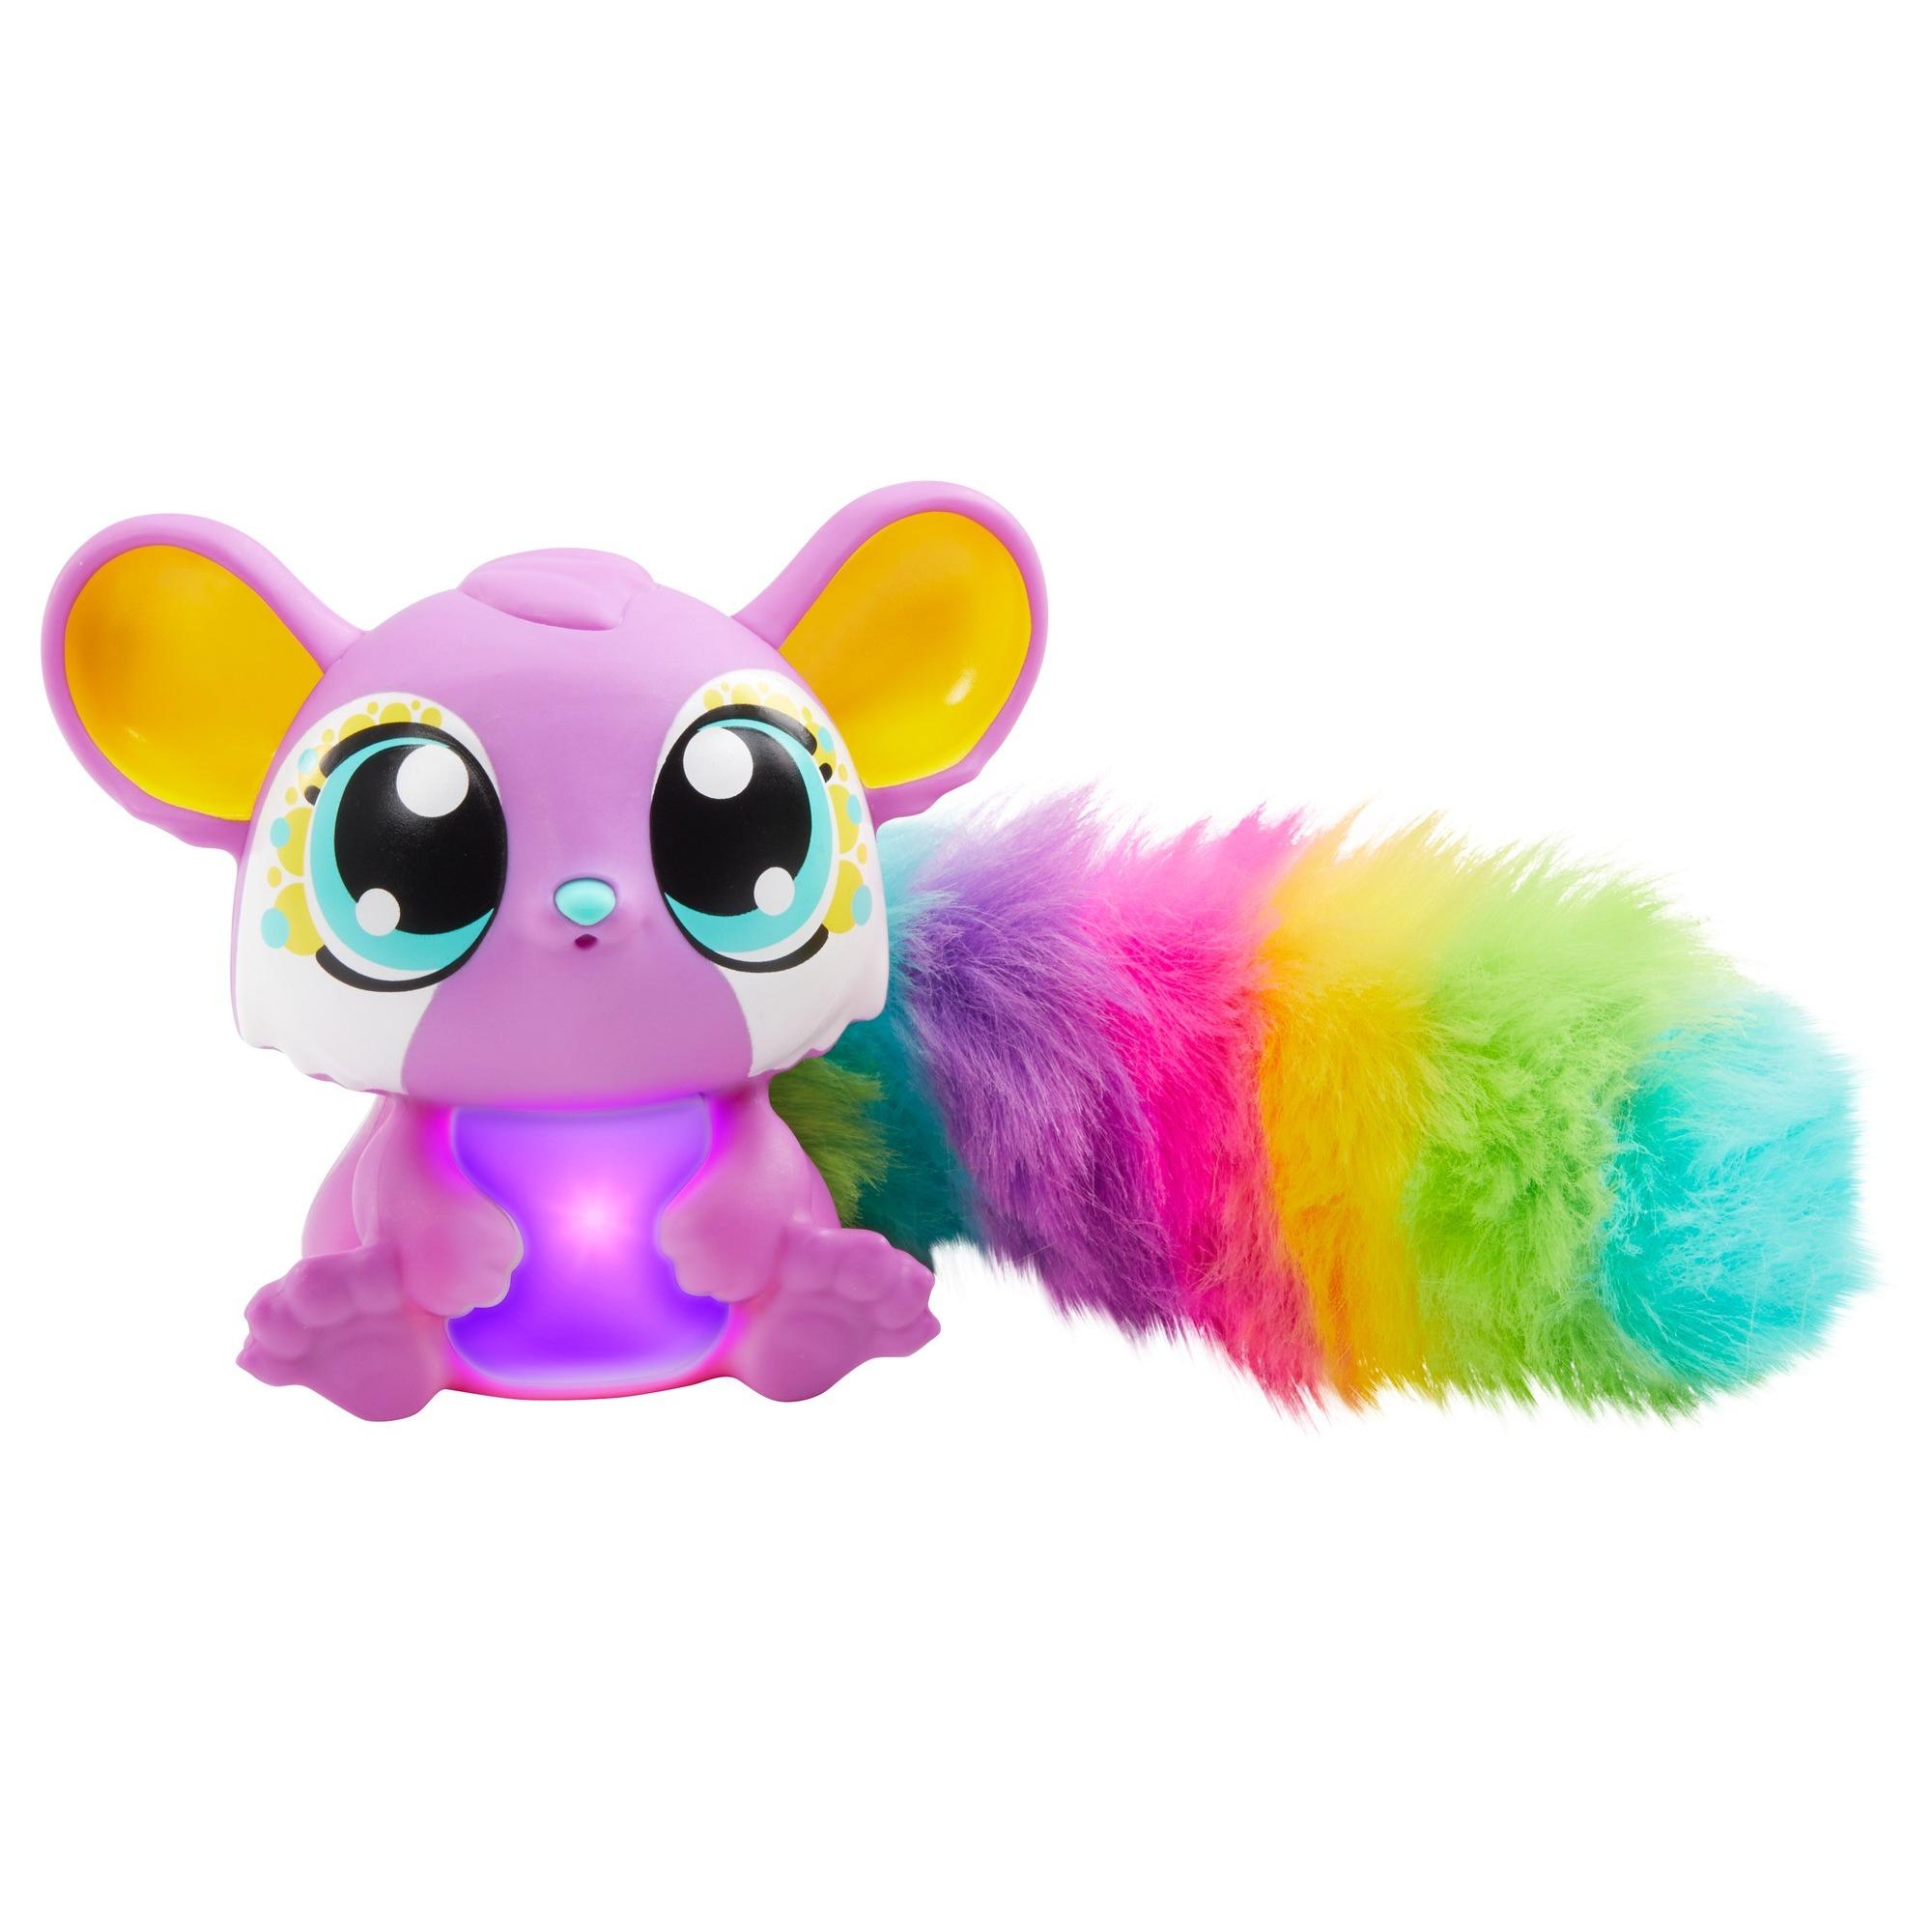 Lil' Gleemerz Babies Interactive Light-Up Figure (Styles May Vary) - image 9 of 18